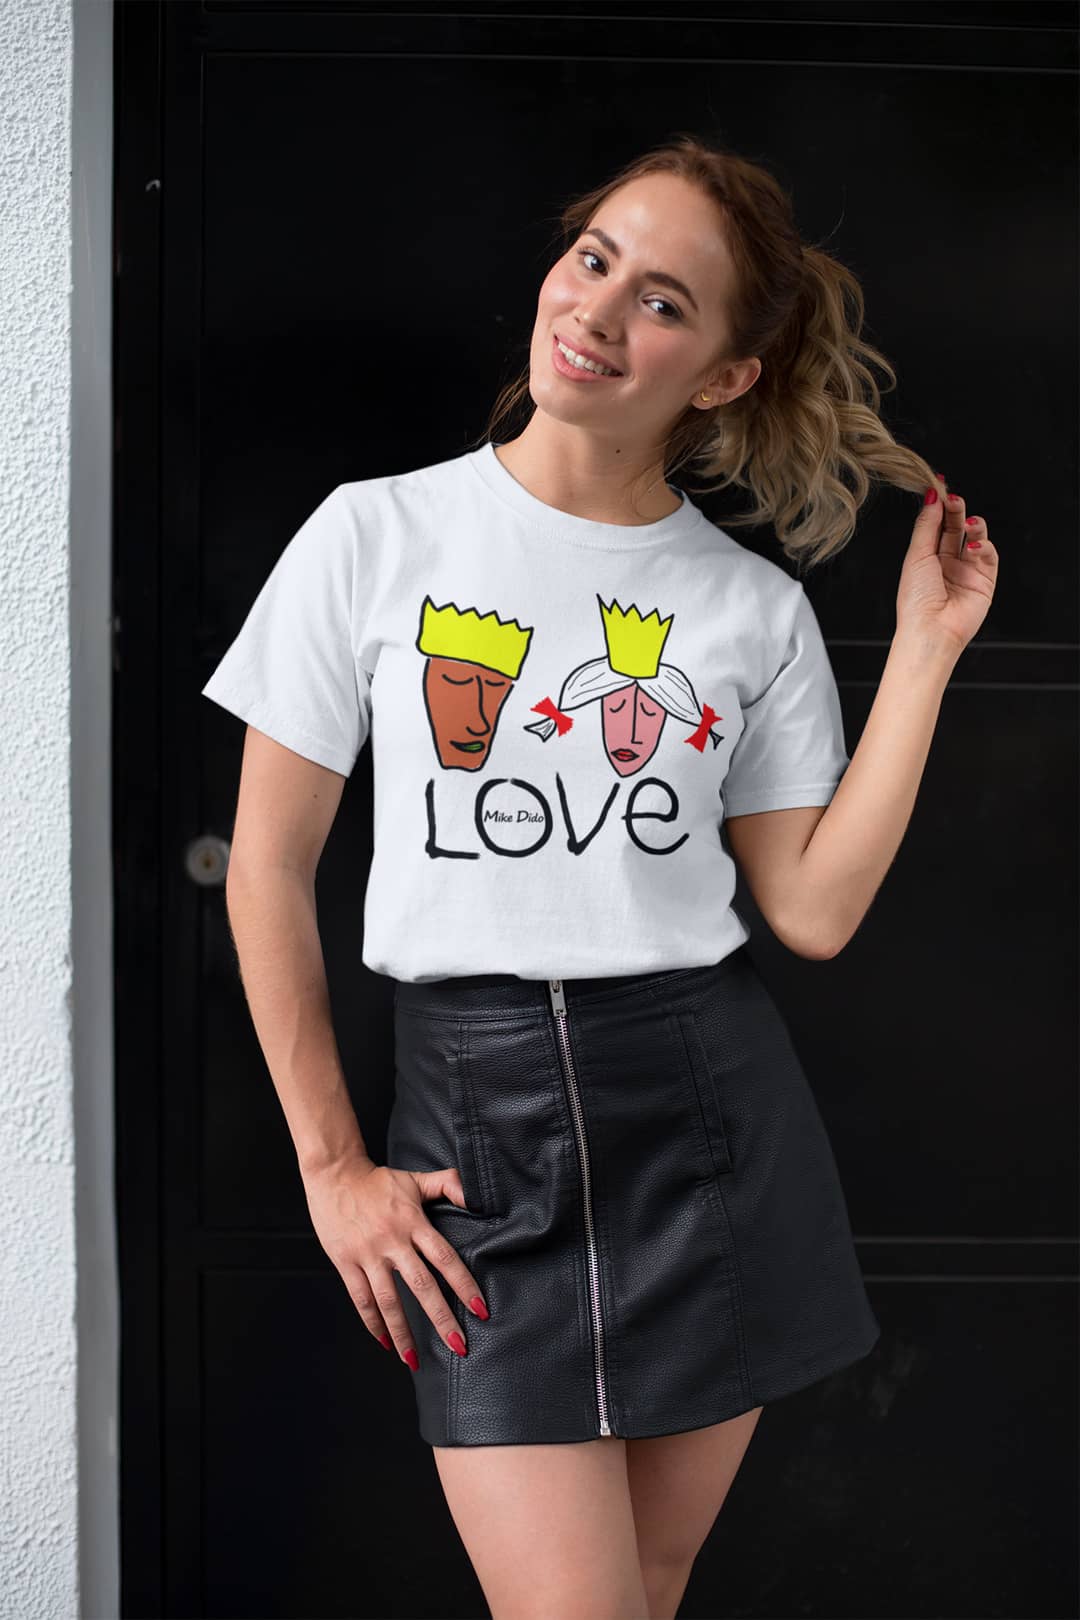 Stylish Designer Tee King Queen Love by Mike Dido